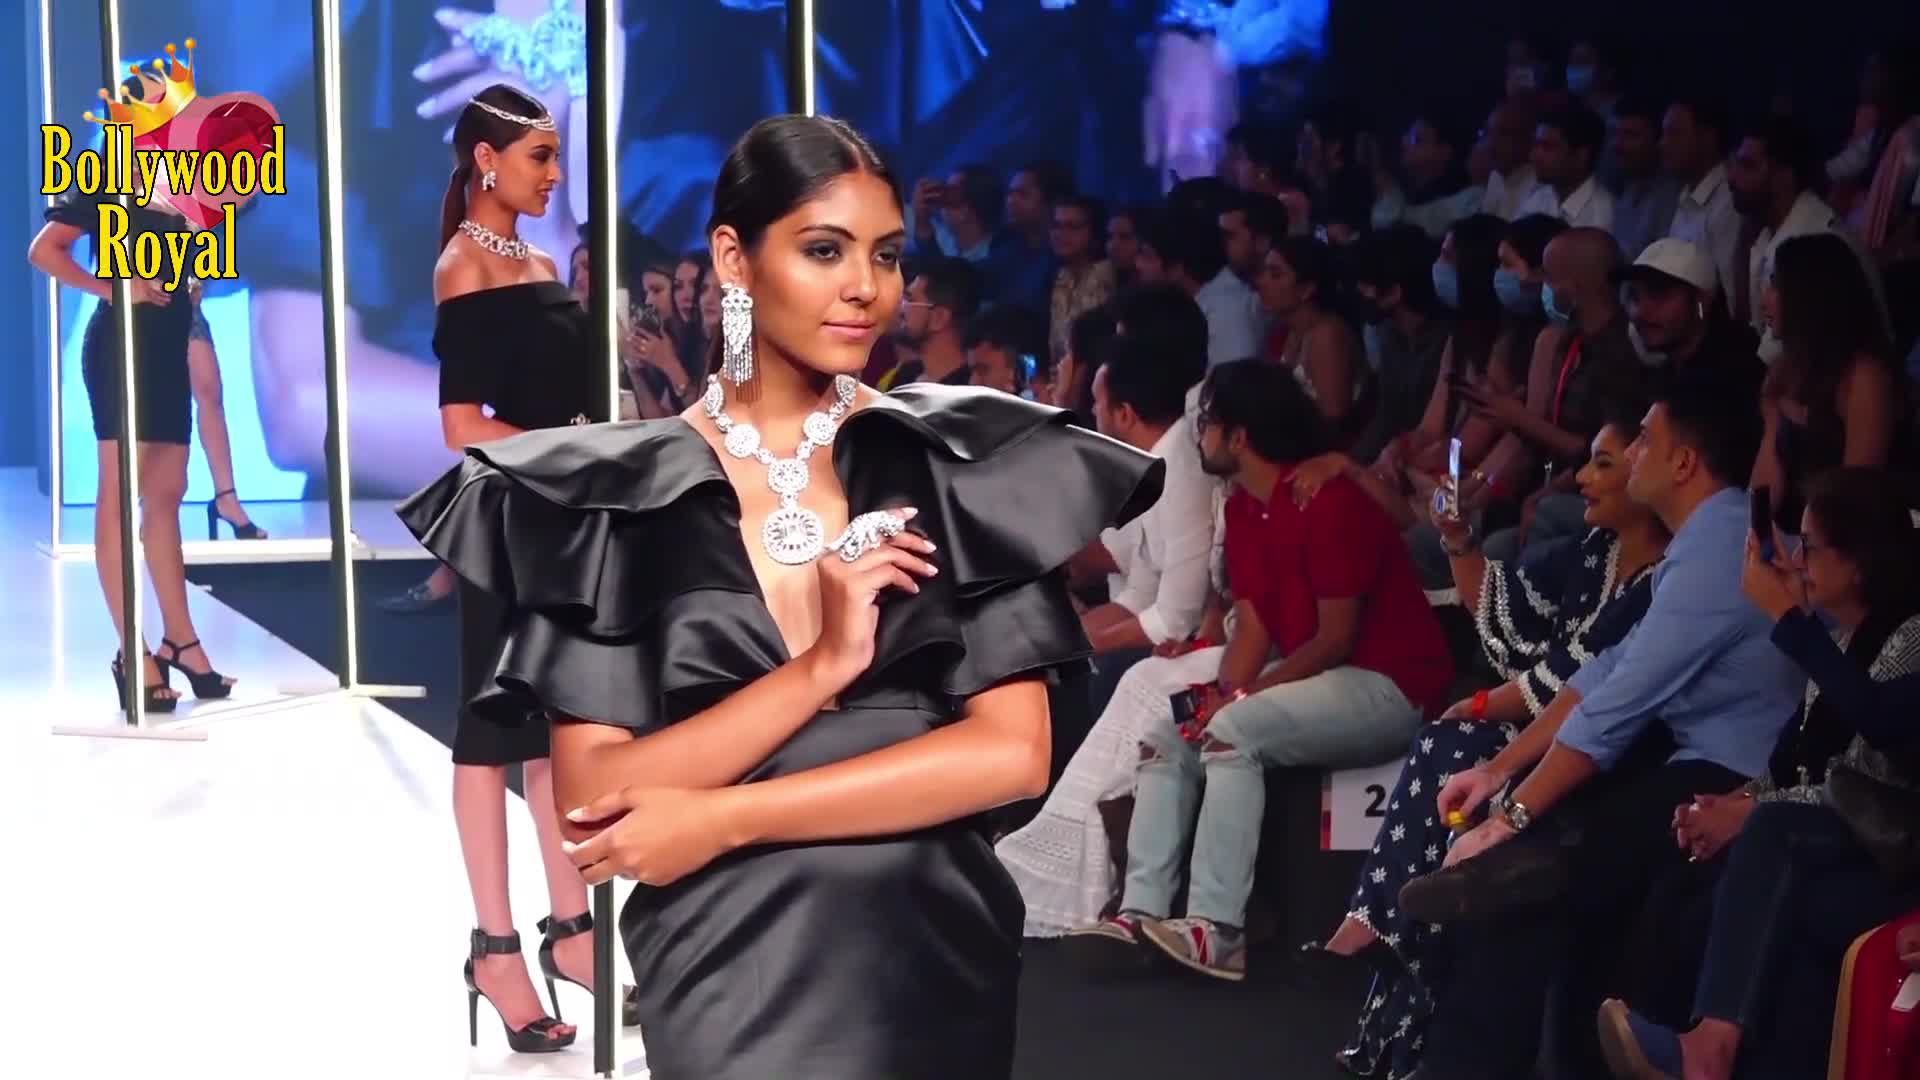 Karishma Tanna Turns Showstopper For Jewels By Queenie At Bombay Times Fashion Week 2020